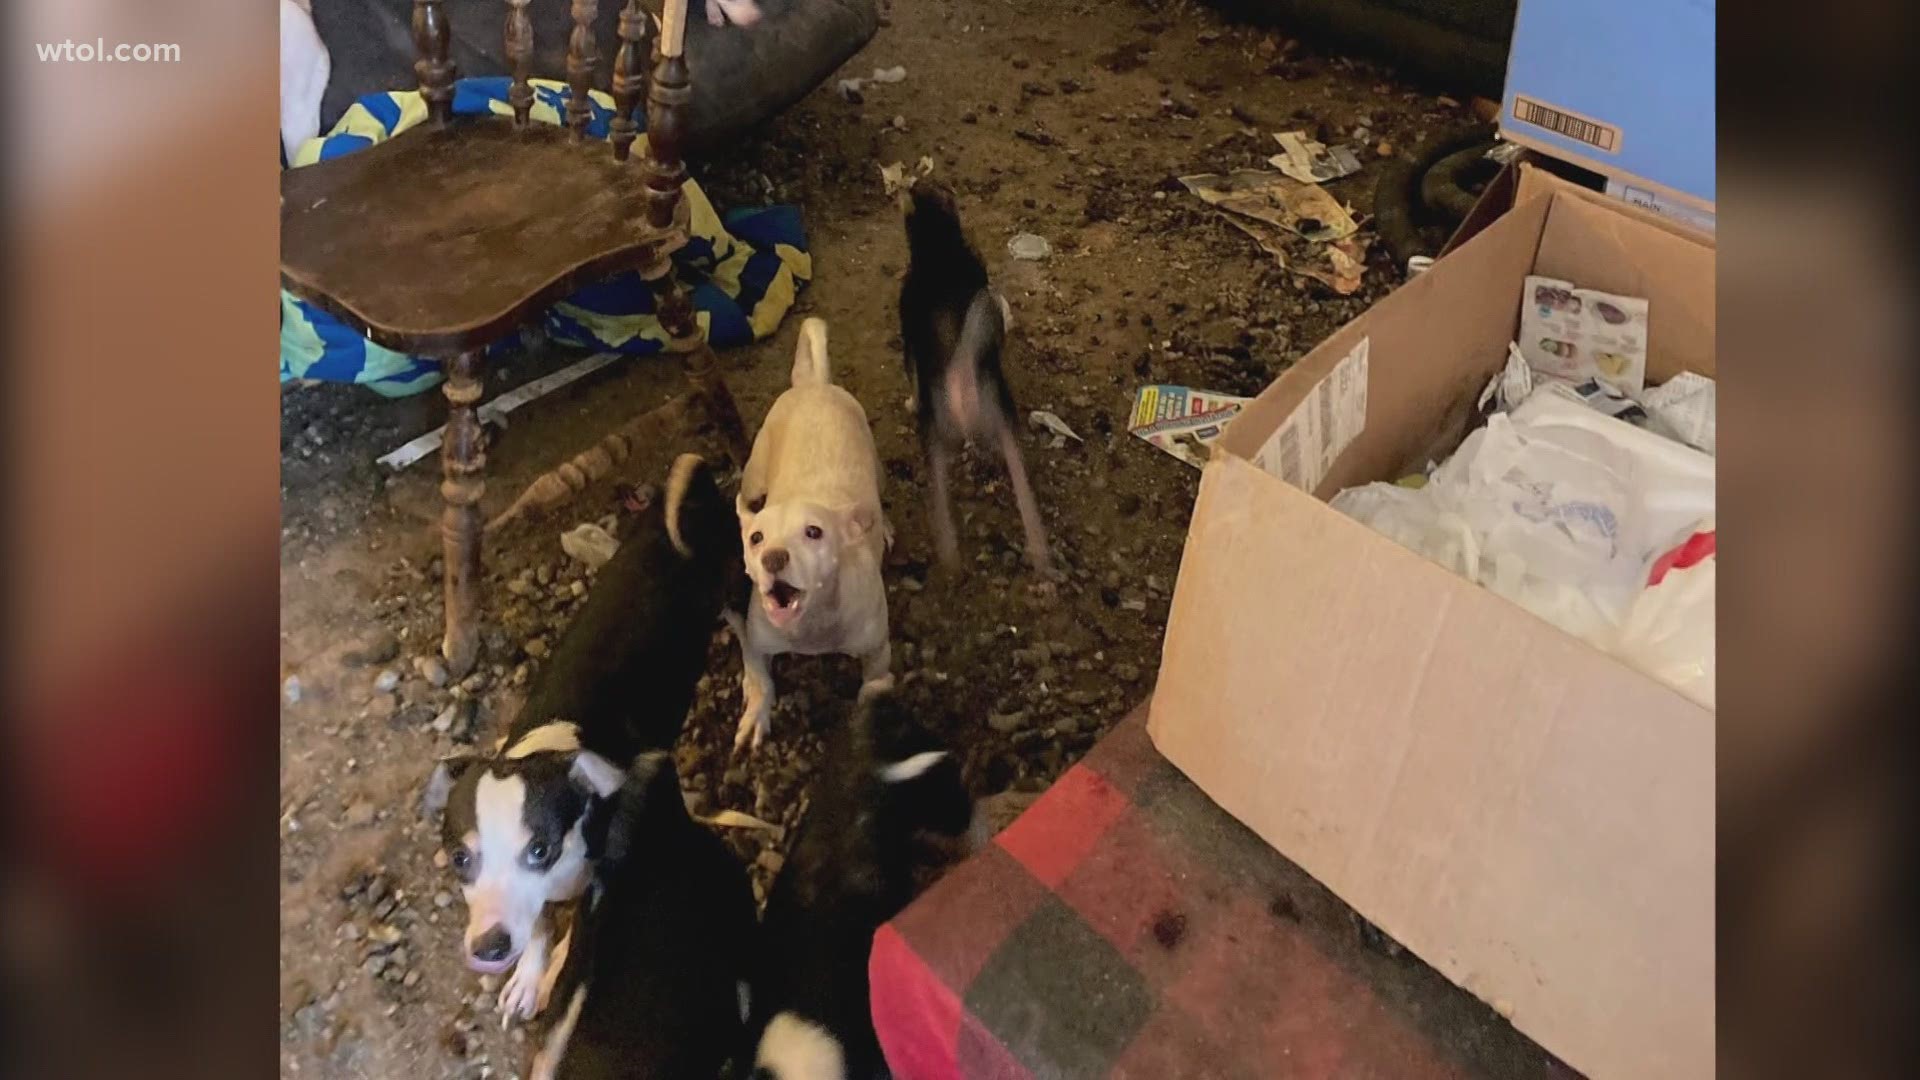 The 12 dogs were removed from a house in 'deplorable conditions' under a month ago, covered in filth and bugs. The now-healthy pups are ready for forever homes.